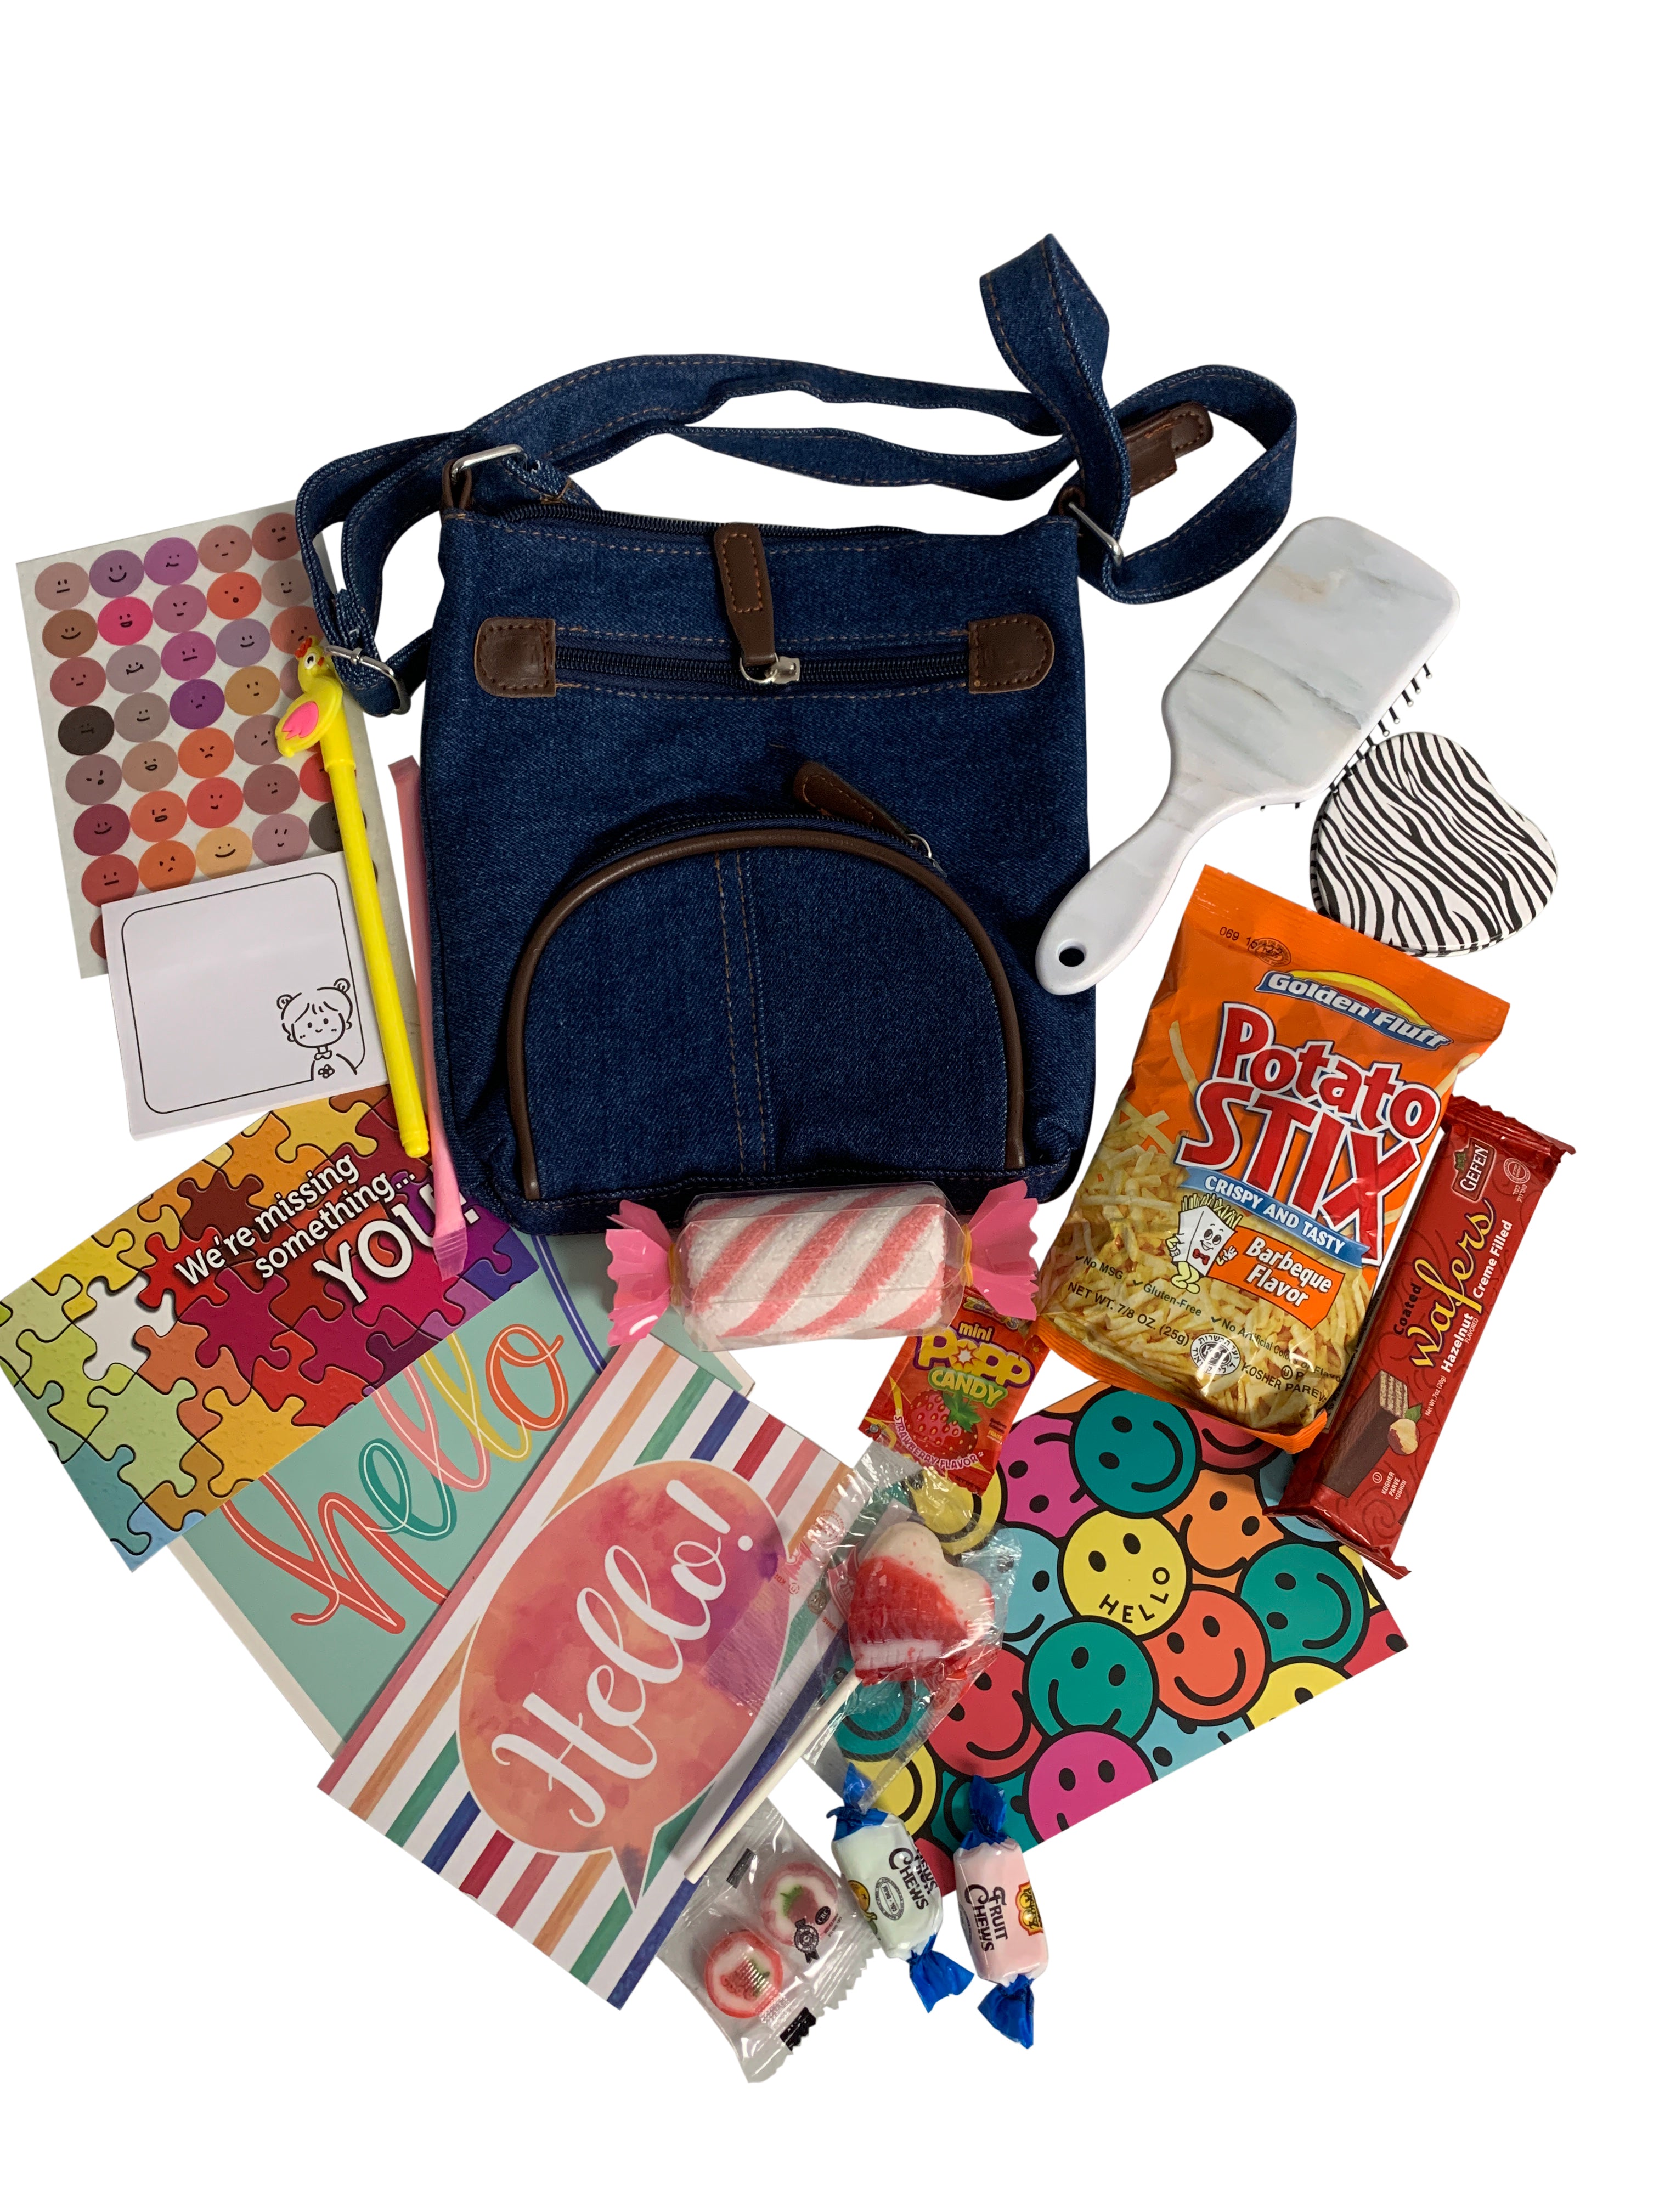 "Bag of Fun" Camp Packages for girls in an adorable useful denim side bag / brush/ towel with lots of more goodies